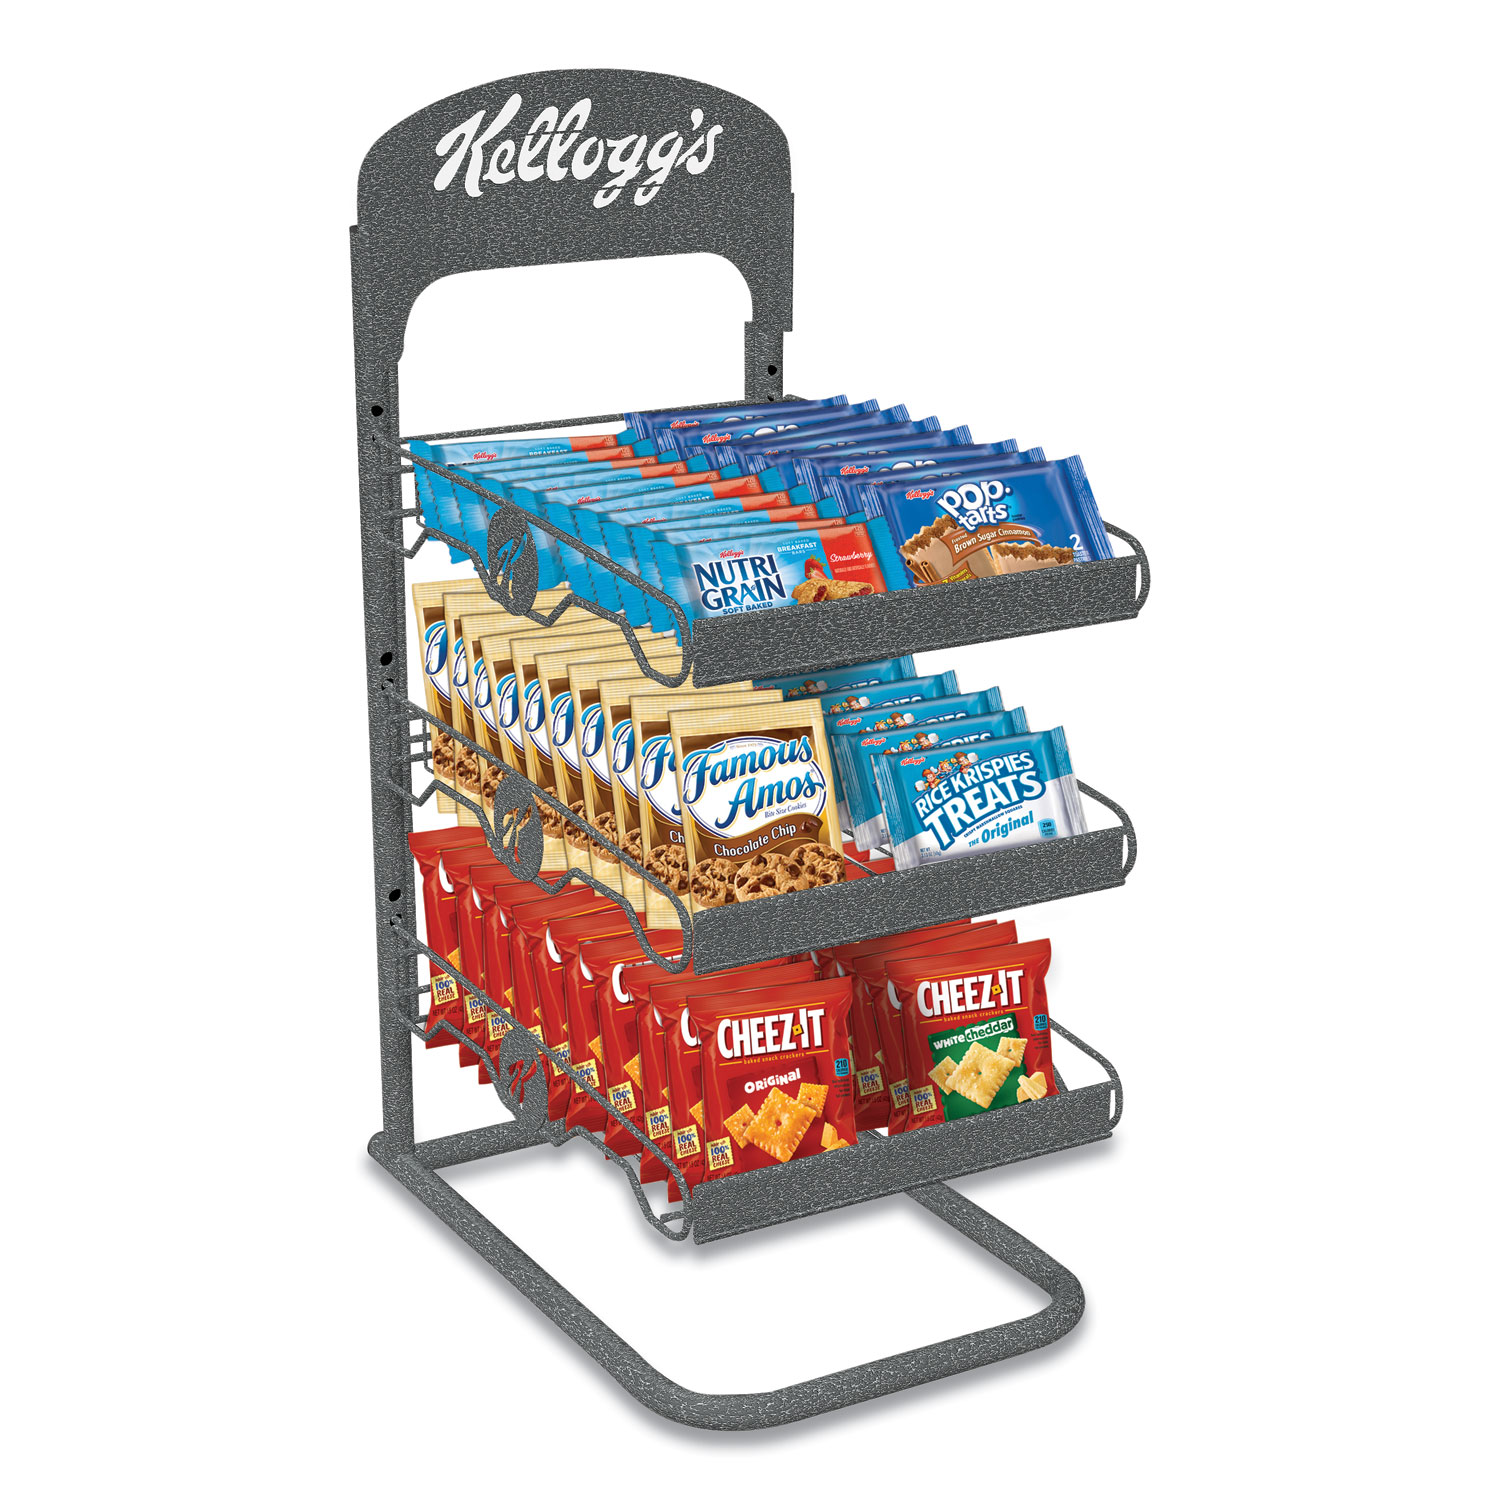 Kelloggs® Breakroom Solution Rack with Kelloggs Snack Products, 26.38l x 18.5w x 12.5h